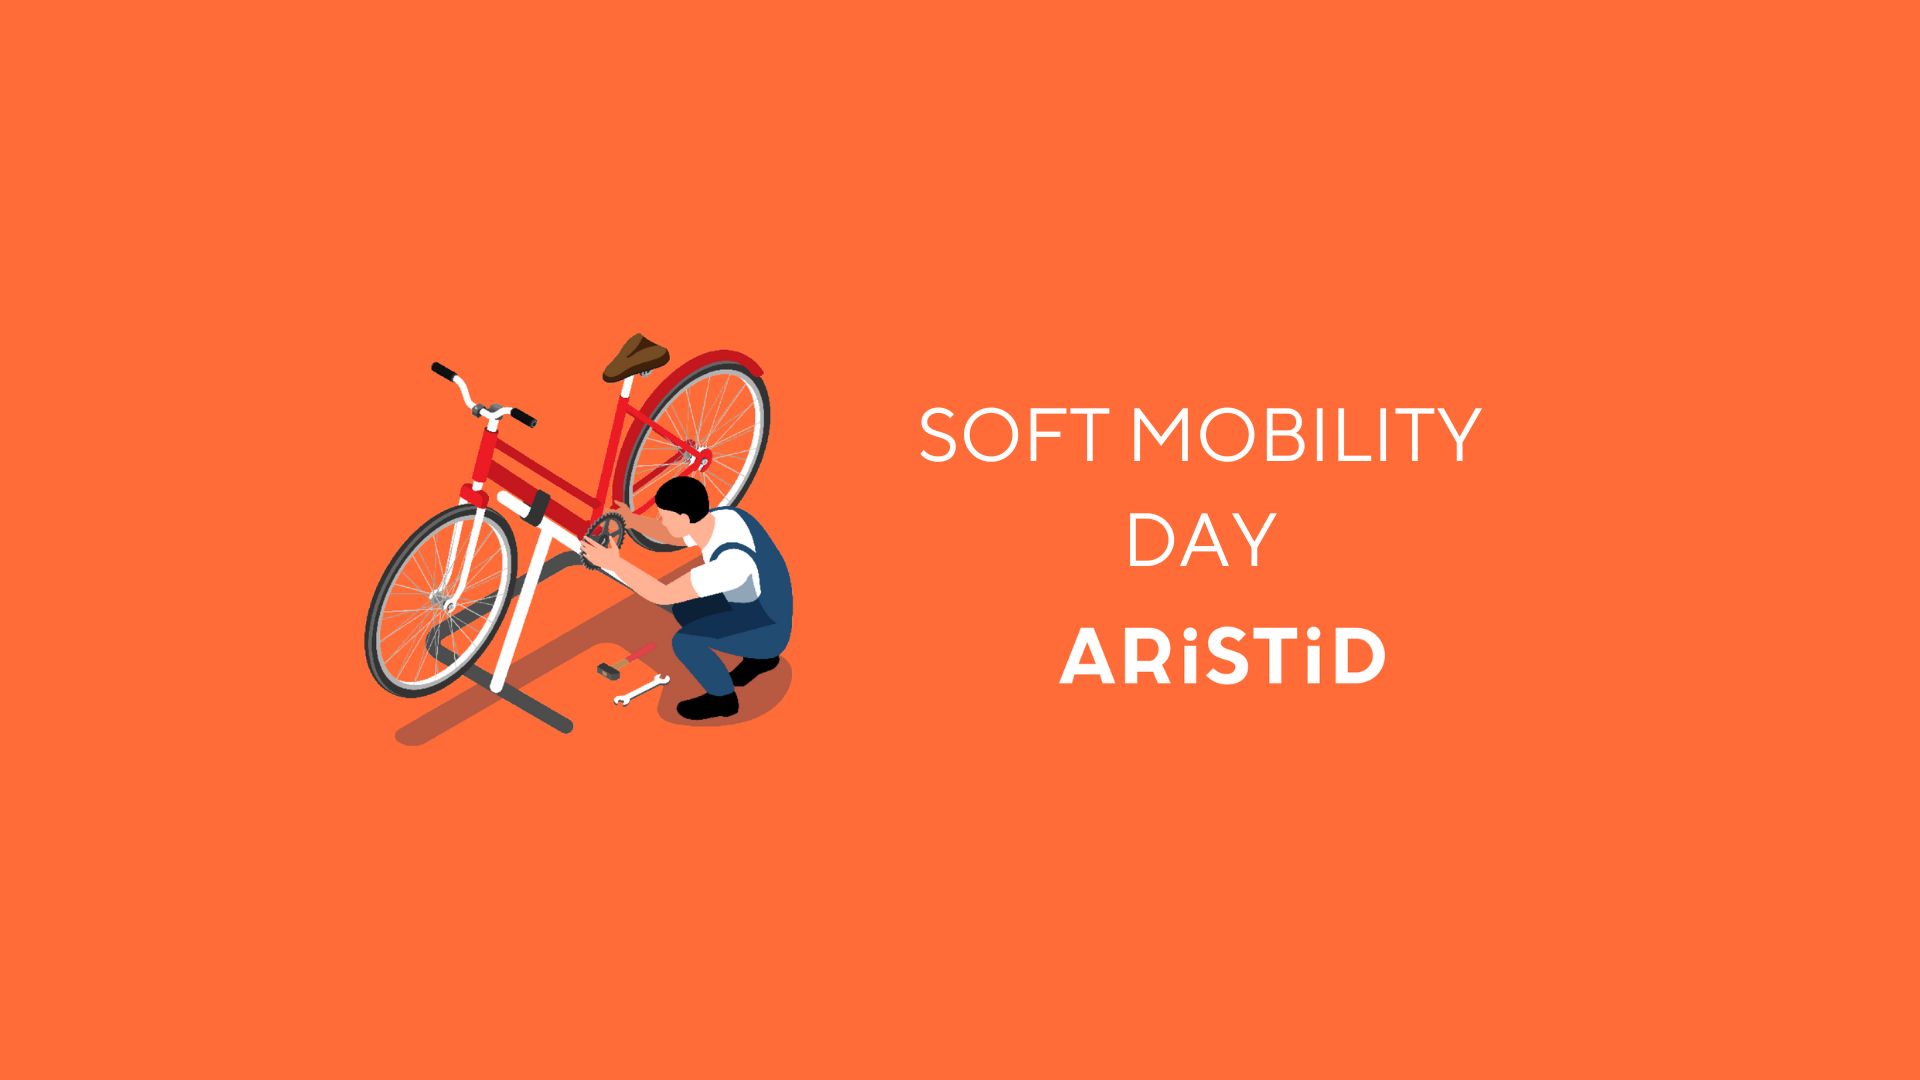 ARISTID supports soft mobility 🚴‍♀️